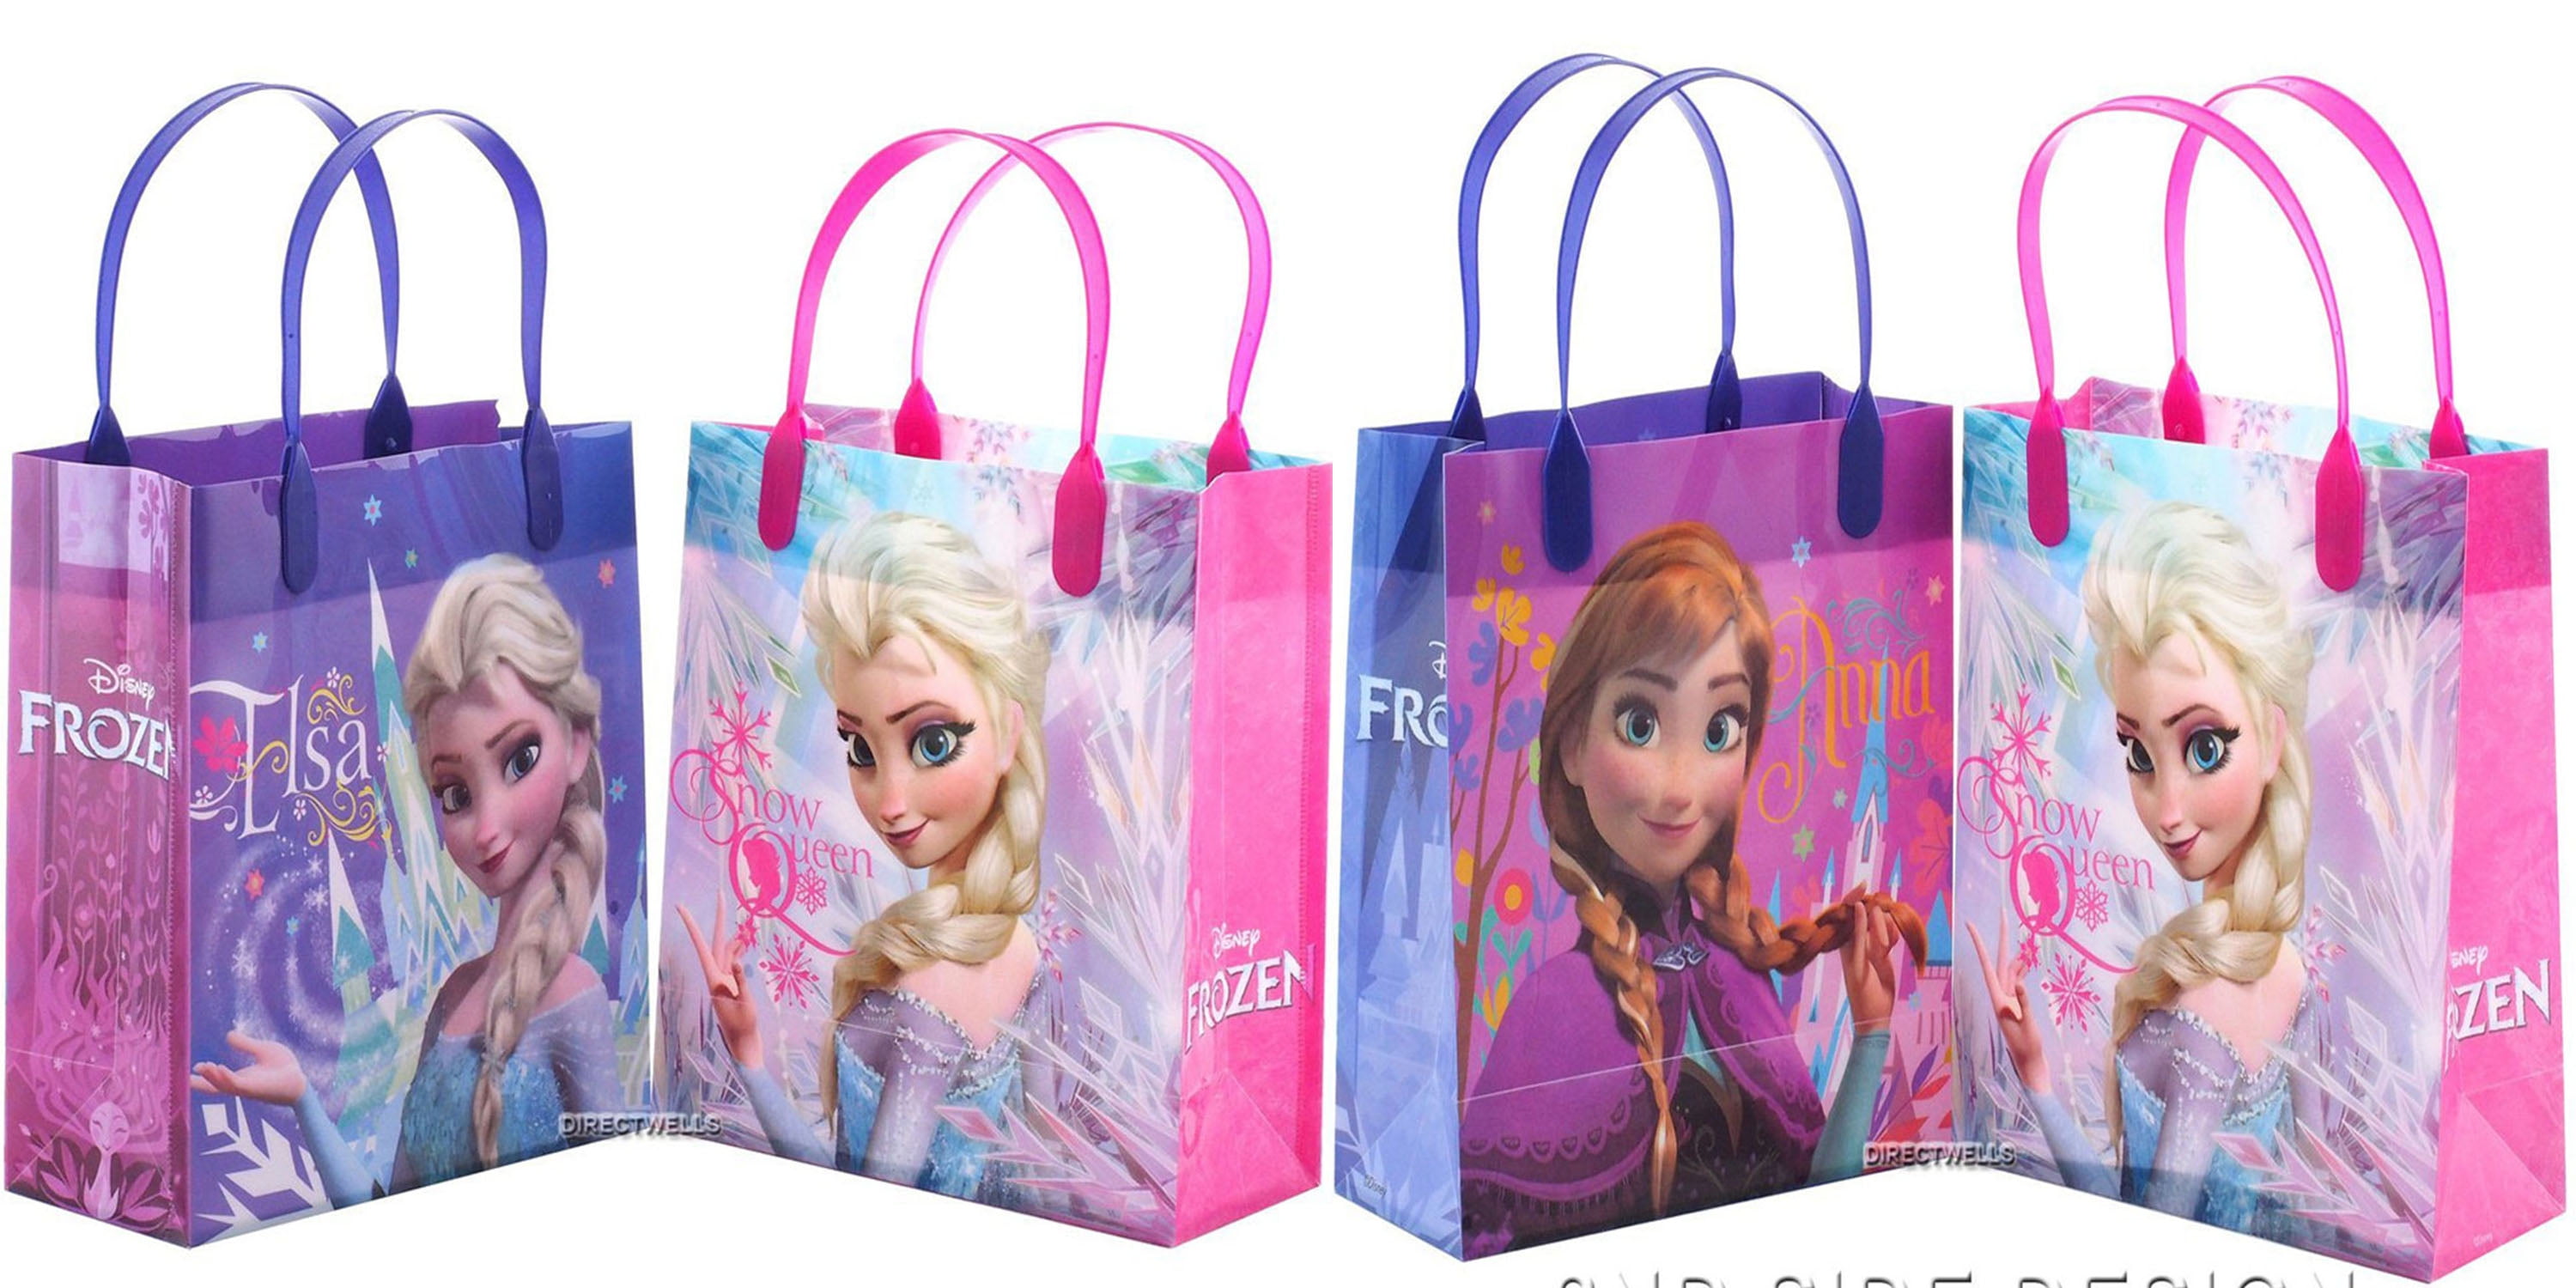 Disney Frozen Olaf  I Love Summer  Premium Quality Party Favor Reusable Goodie Small Gift Bags 12 12 Bags